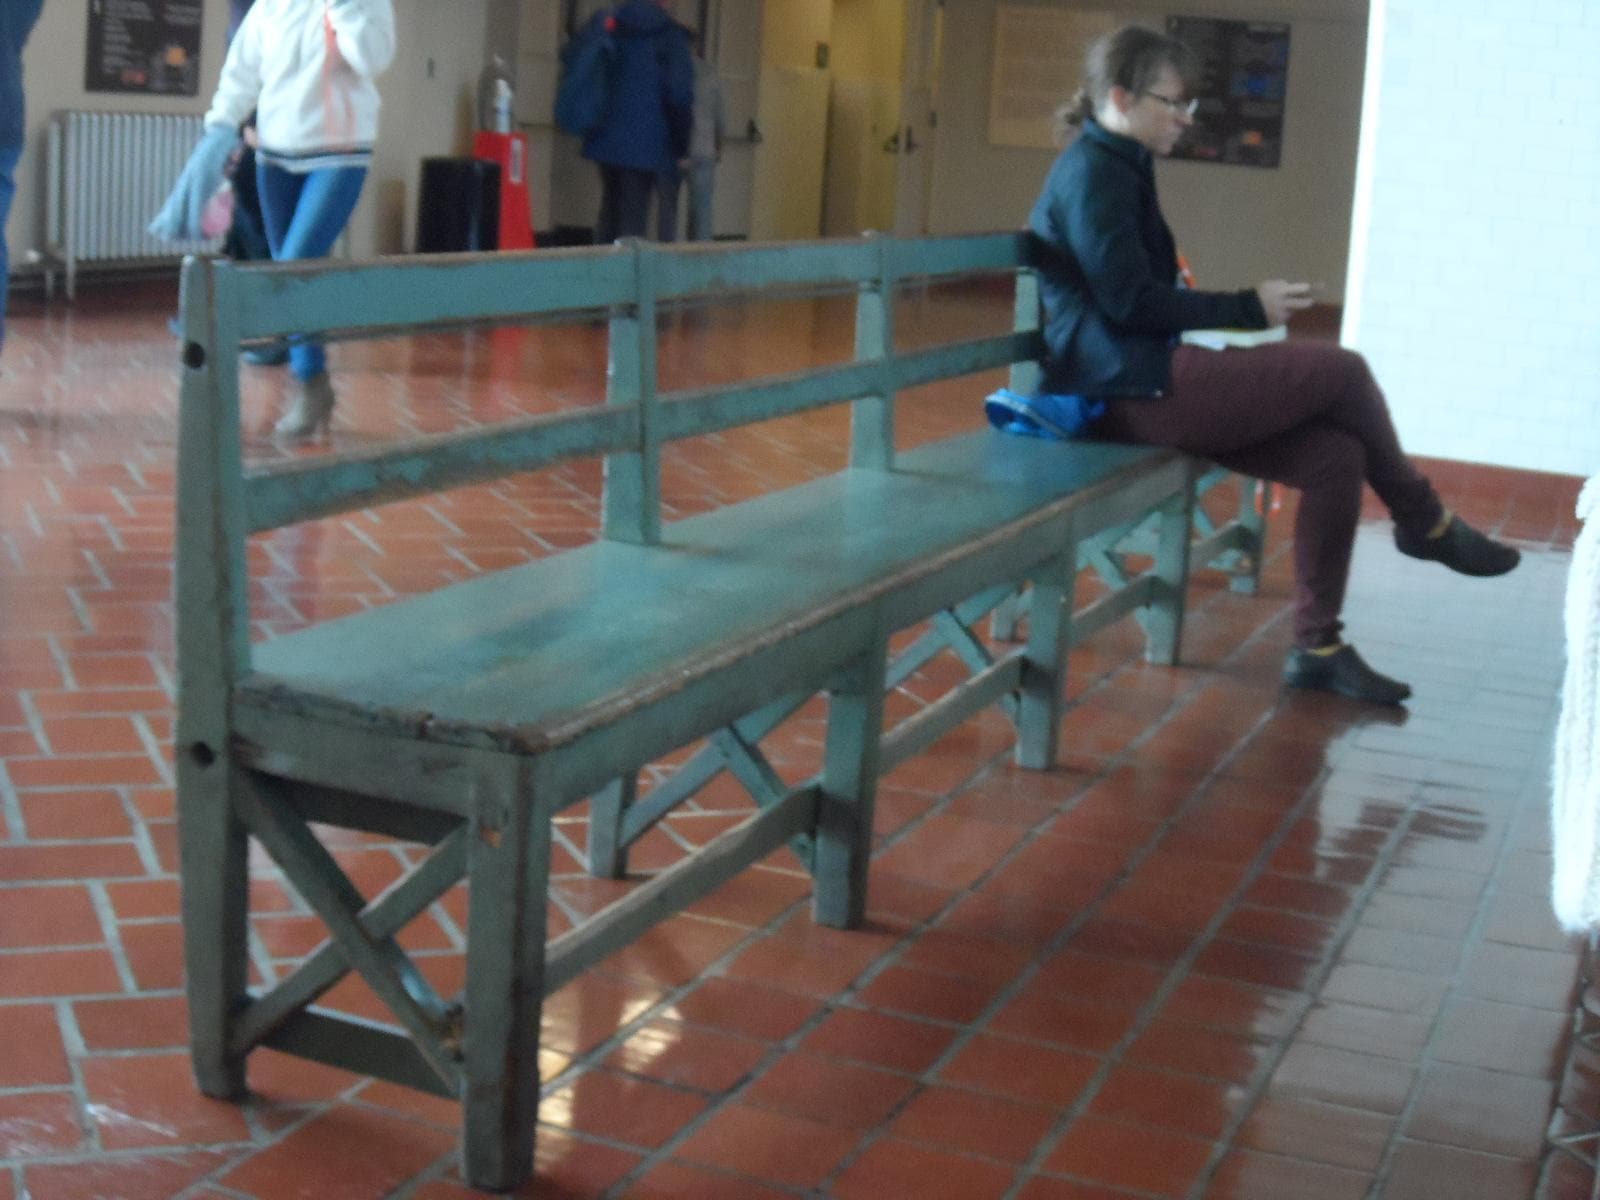 One of the green benches used when the building was in service; photo credit: Katherine Michel